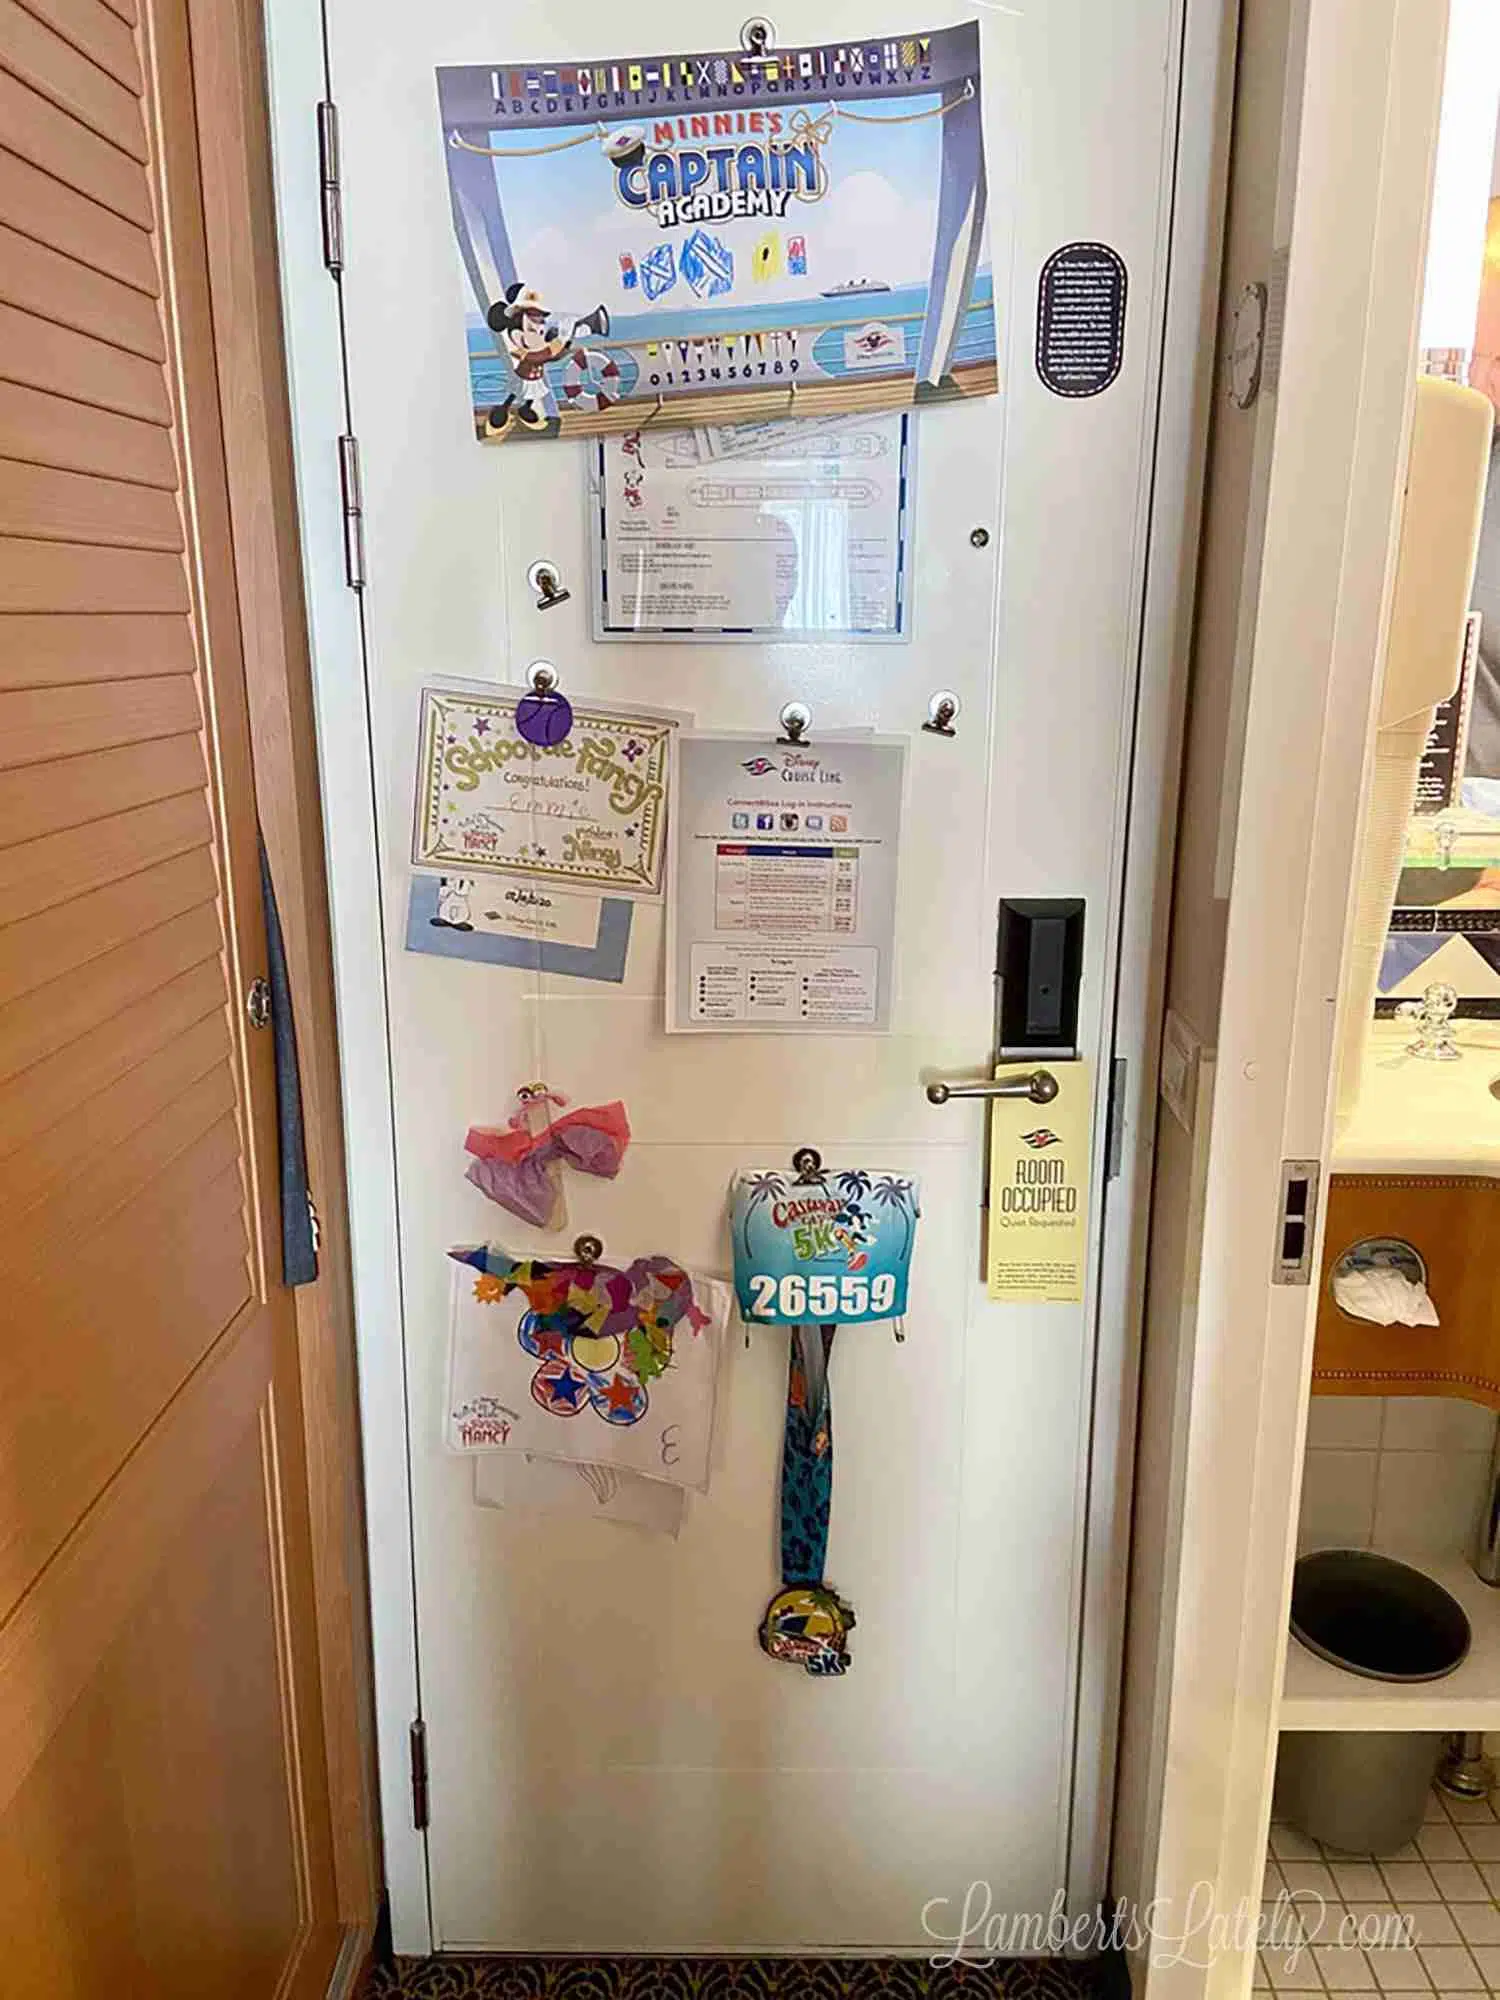 disney cruise cabin door from the inside with magnets holding papers.